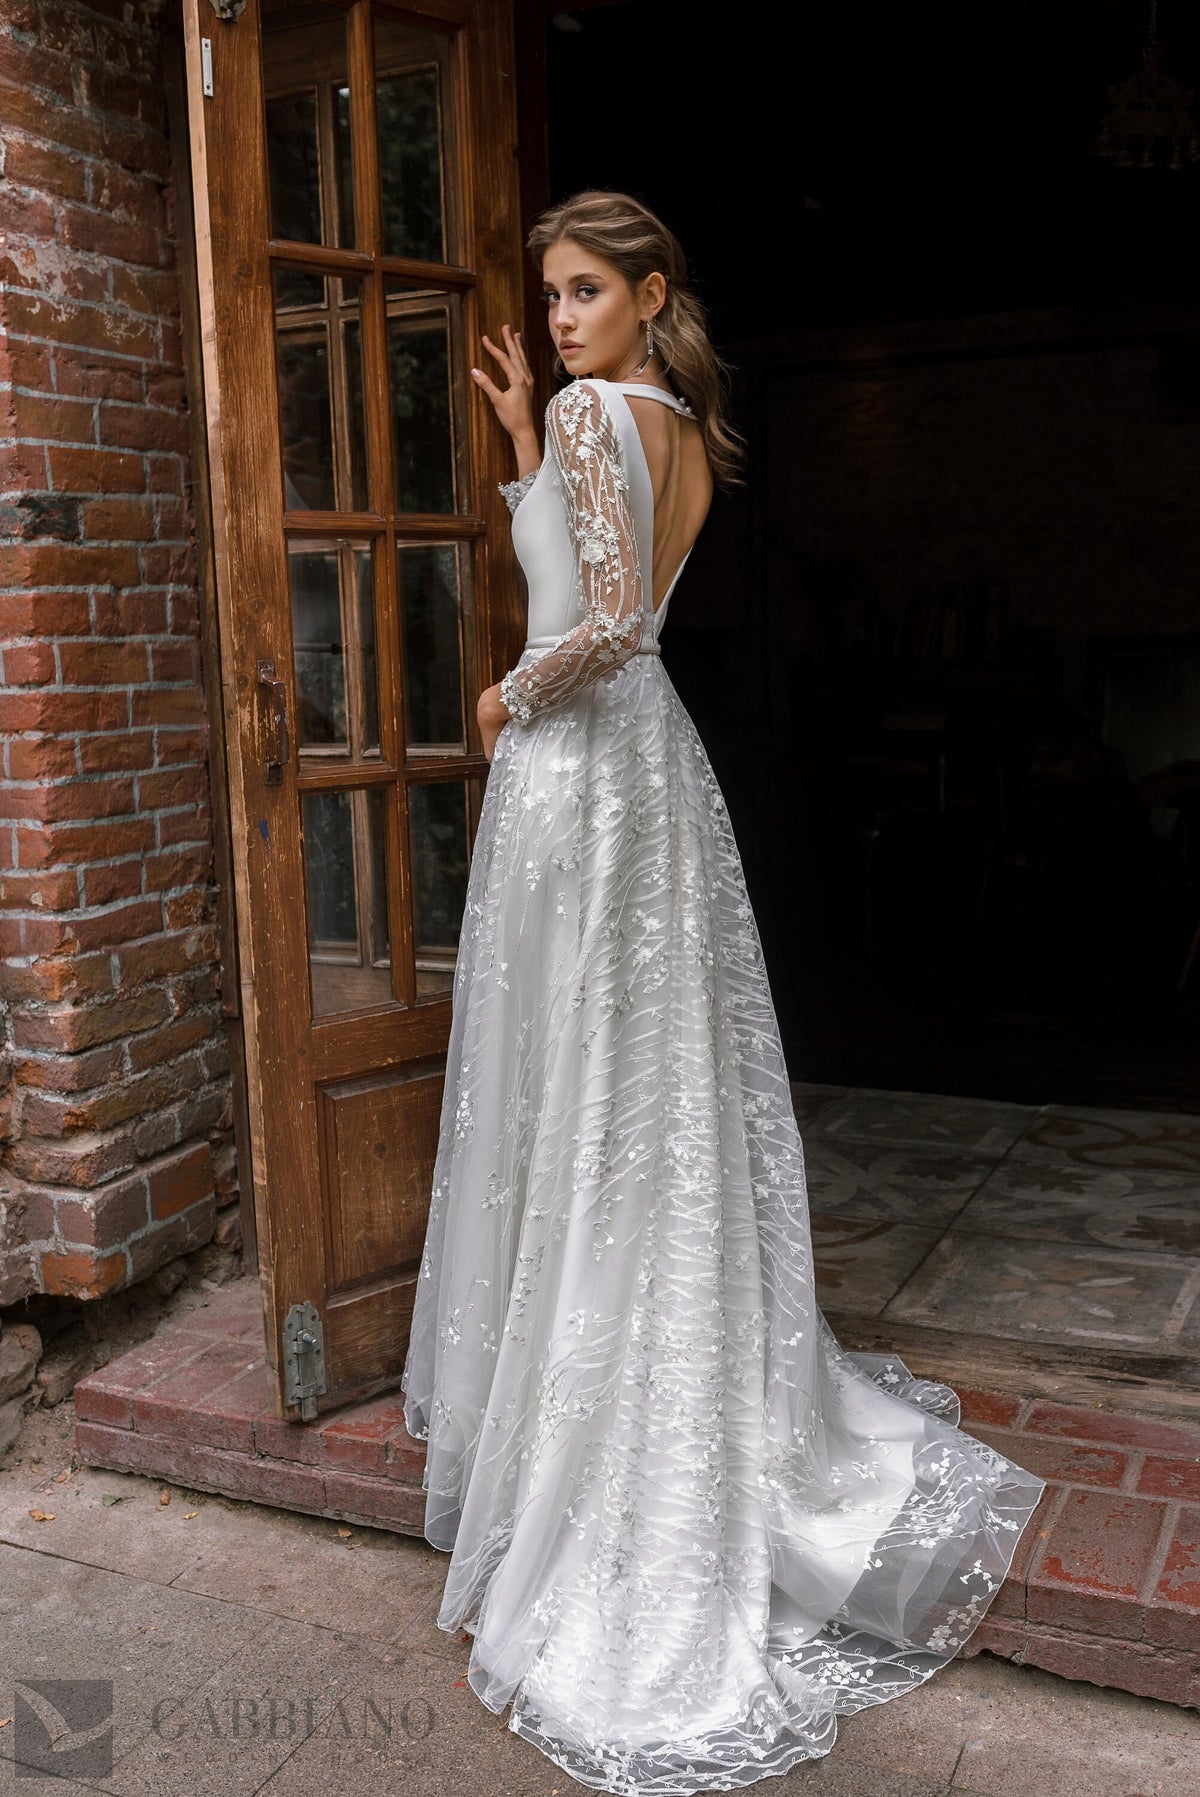 Aline Long Sleeve Wedding Dress, Plunge Neckline with Train and Floral 3D Flower Lace Wedding Dress Bridal Gown Open Back Satin Dress